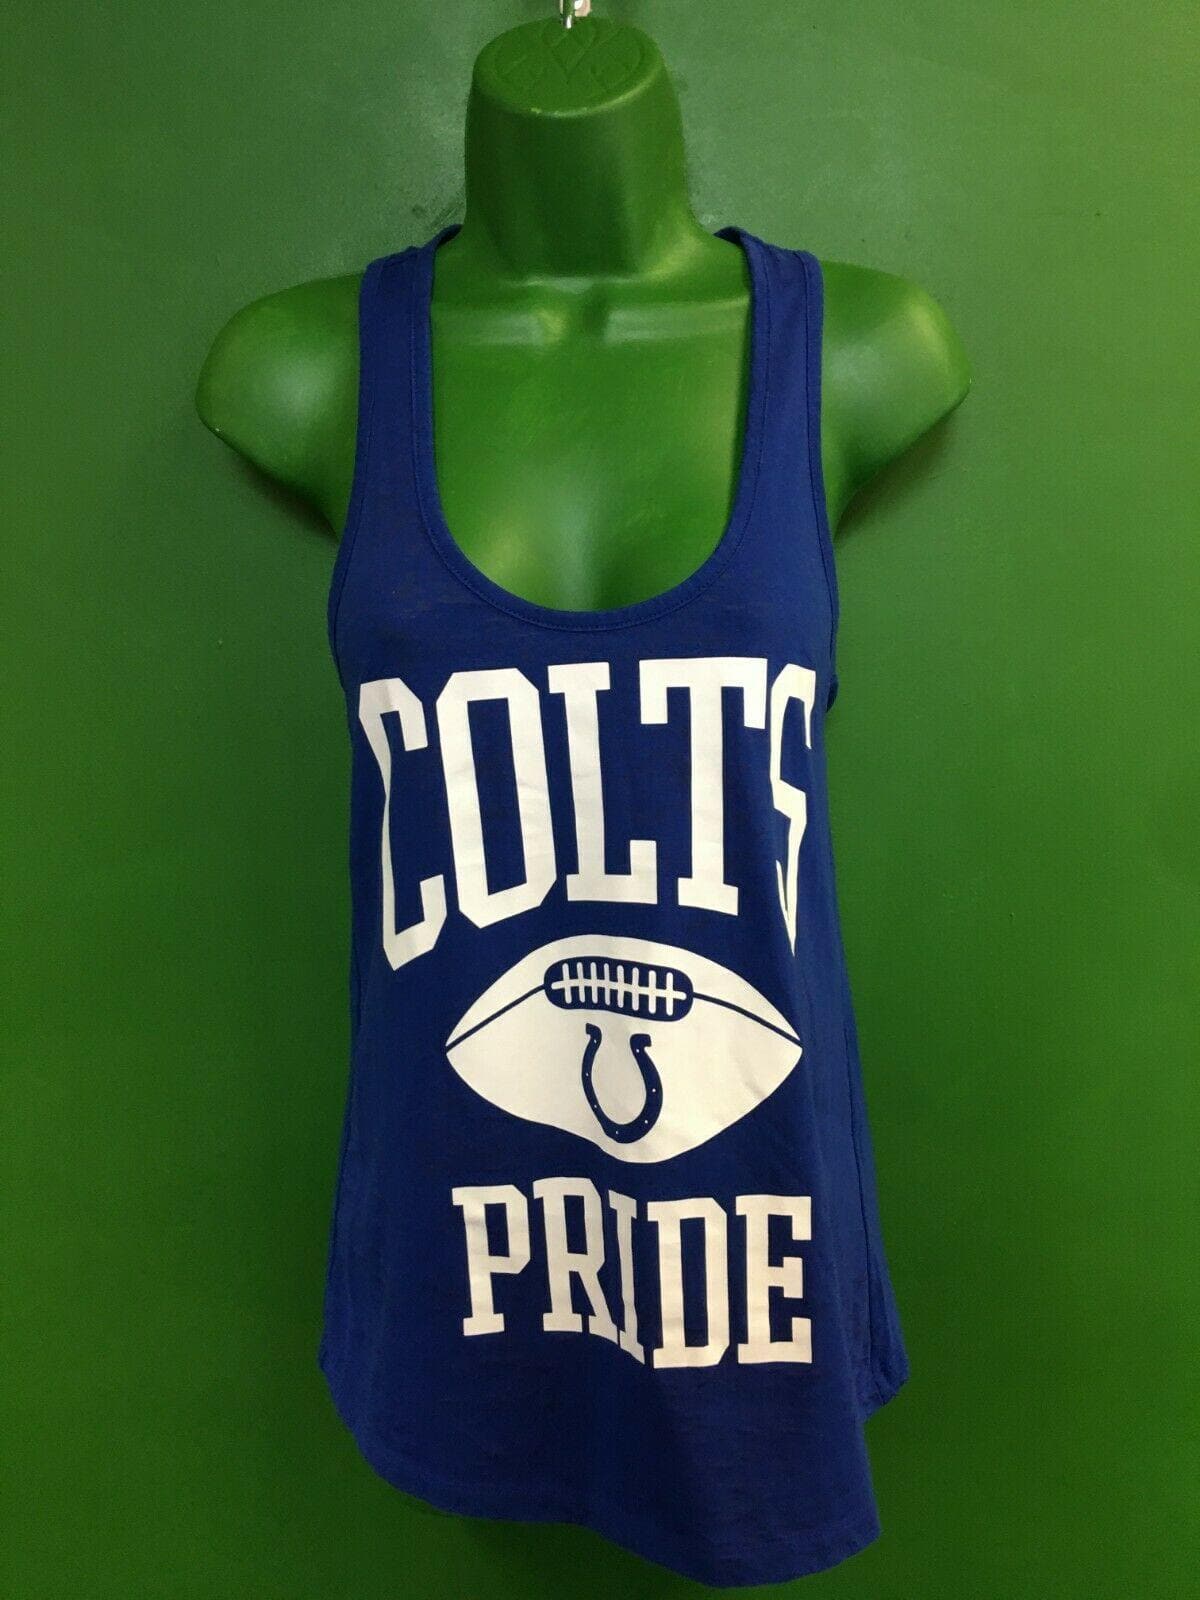 NFL Indianapolis Colts Victoria's Secret PINK Tank Top Women's Small